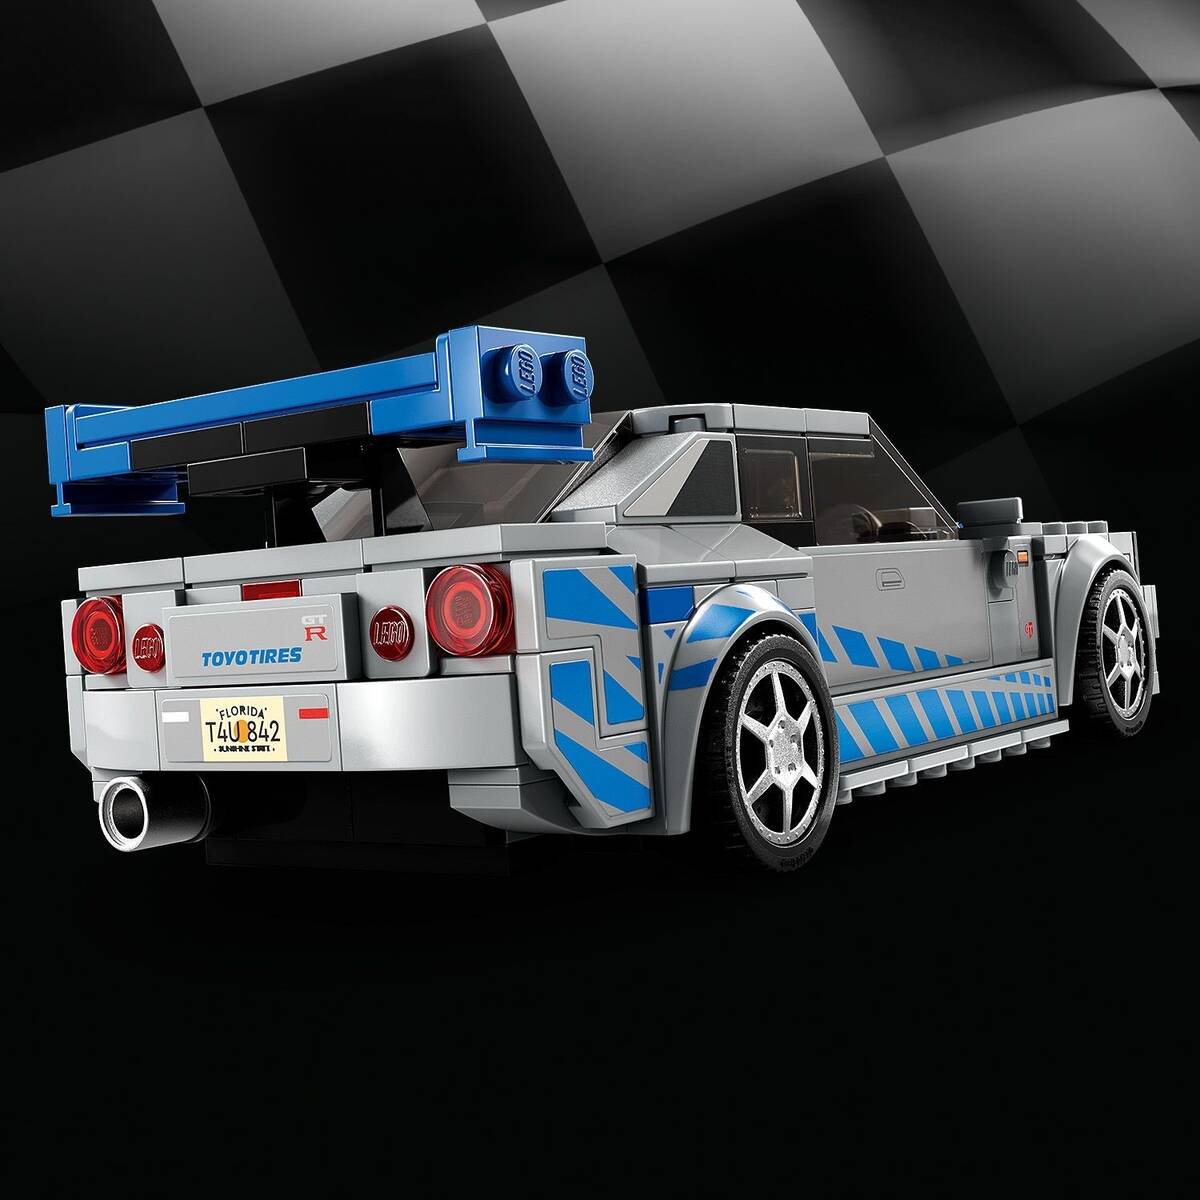 LEGO Speed Champions Fast and Furious Nissan Skyline GT-R(R34)